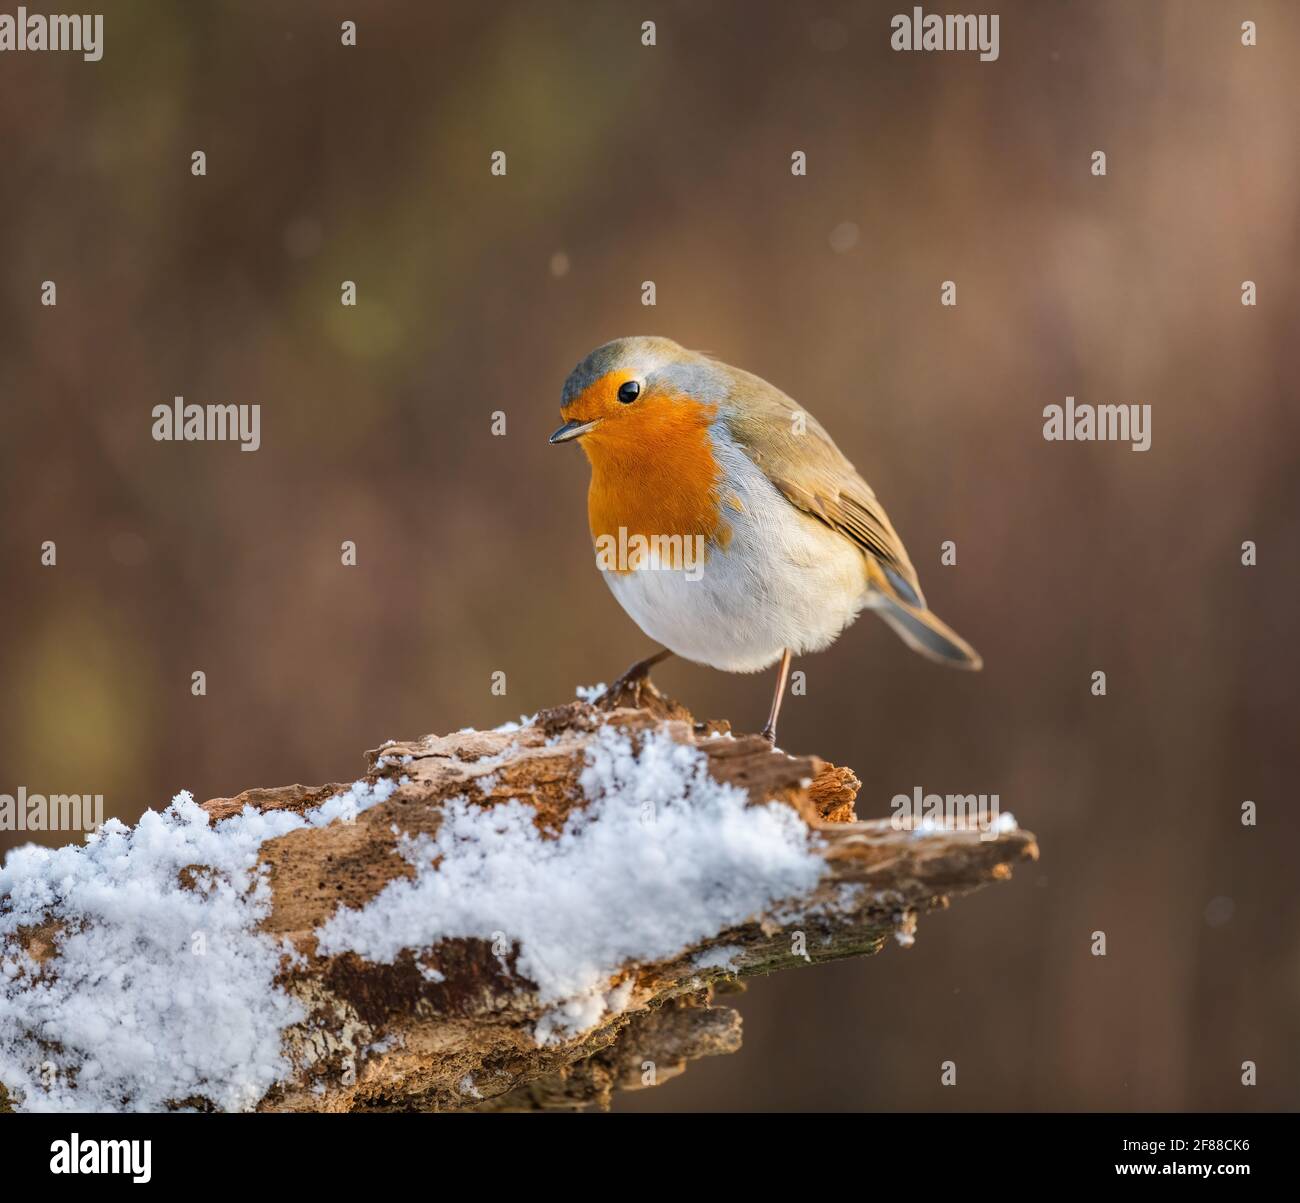 Portrait of a common garden Robin sitting on the edge of a snow covered tree stump with a blurred background. Stock Photo